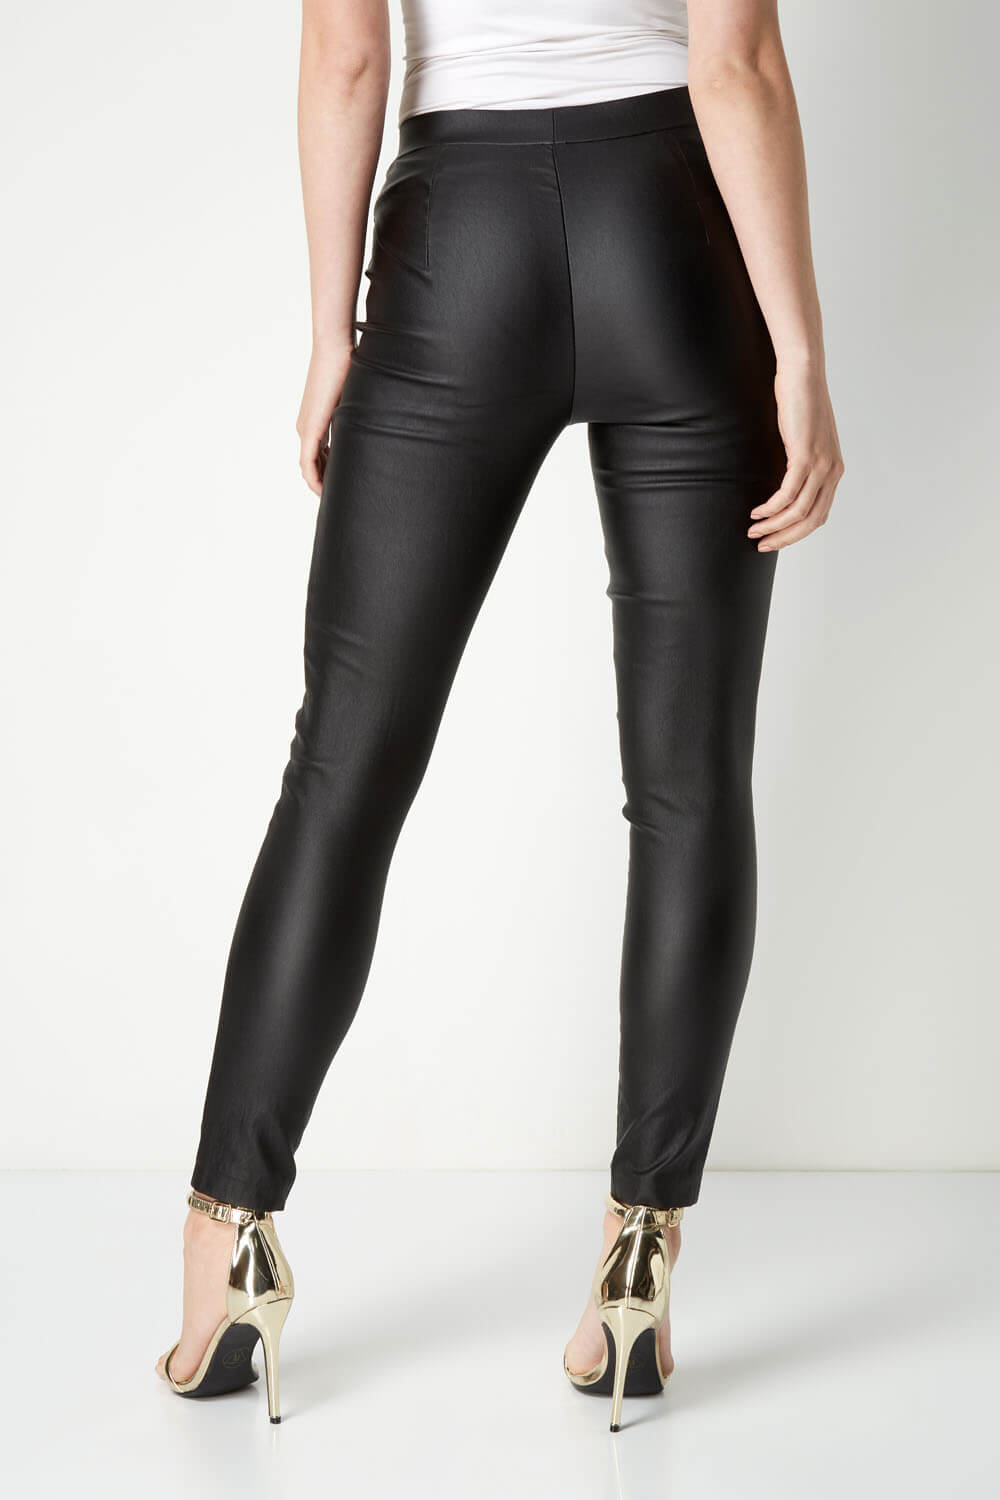 Black Faux Leather Pull On Stretch Trousers , Image 4 of 4